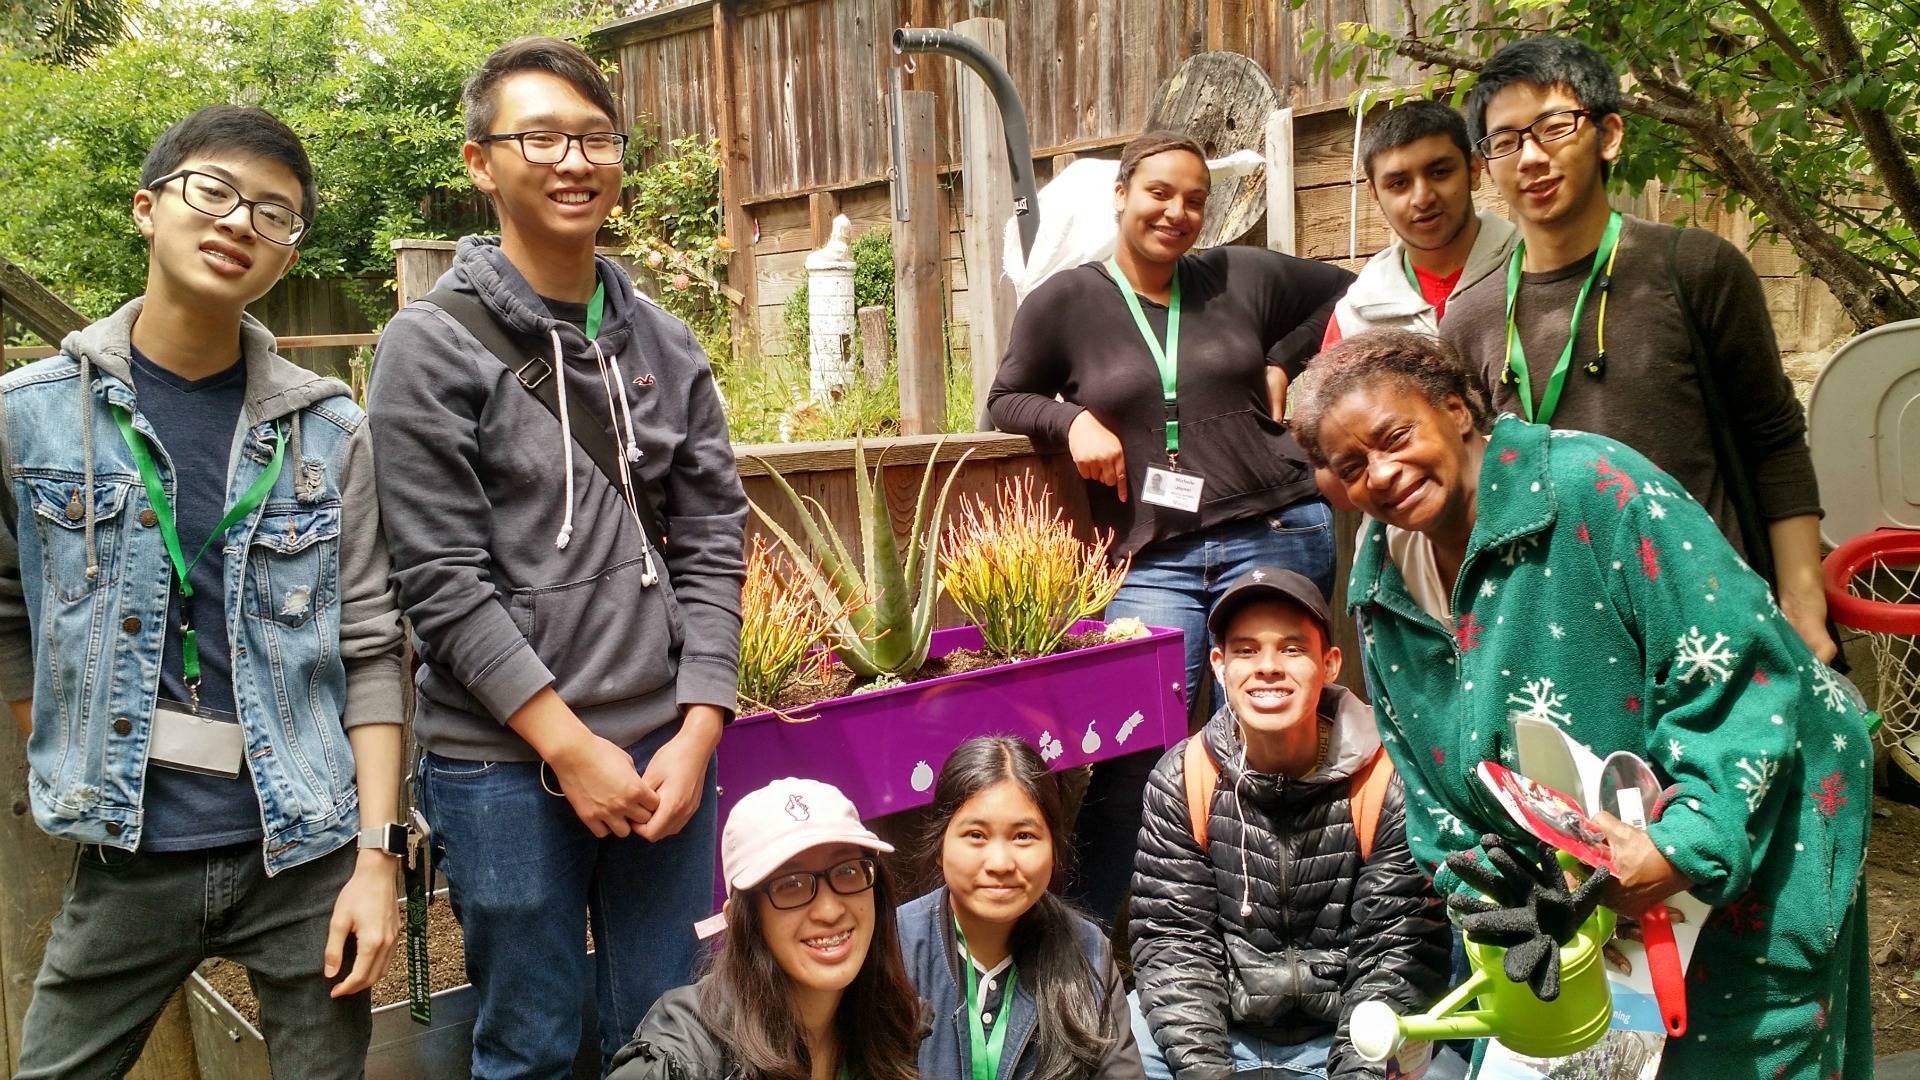 Participants in CommunityGrows' BEETS teen entrepreneur program learn how to build and maintain gardens, as well as other career development skills.  CommunityGrows